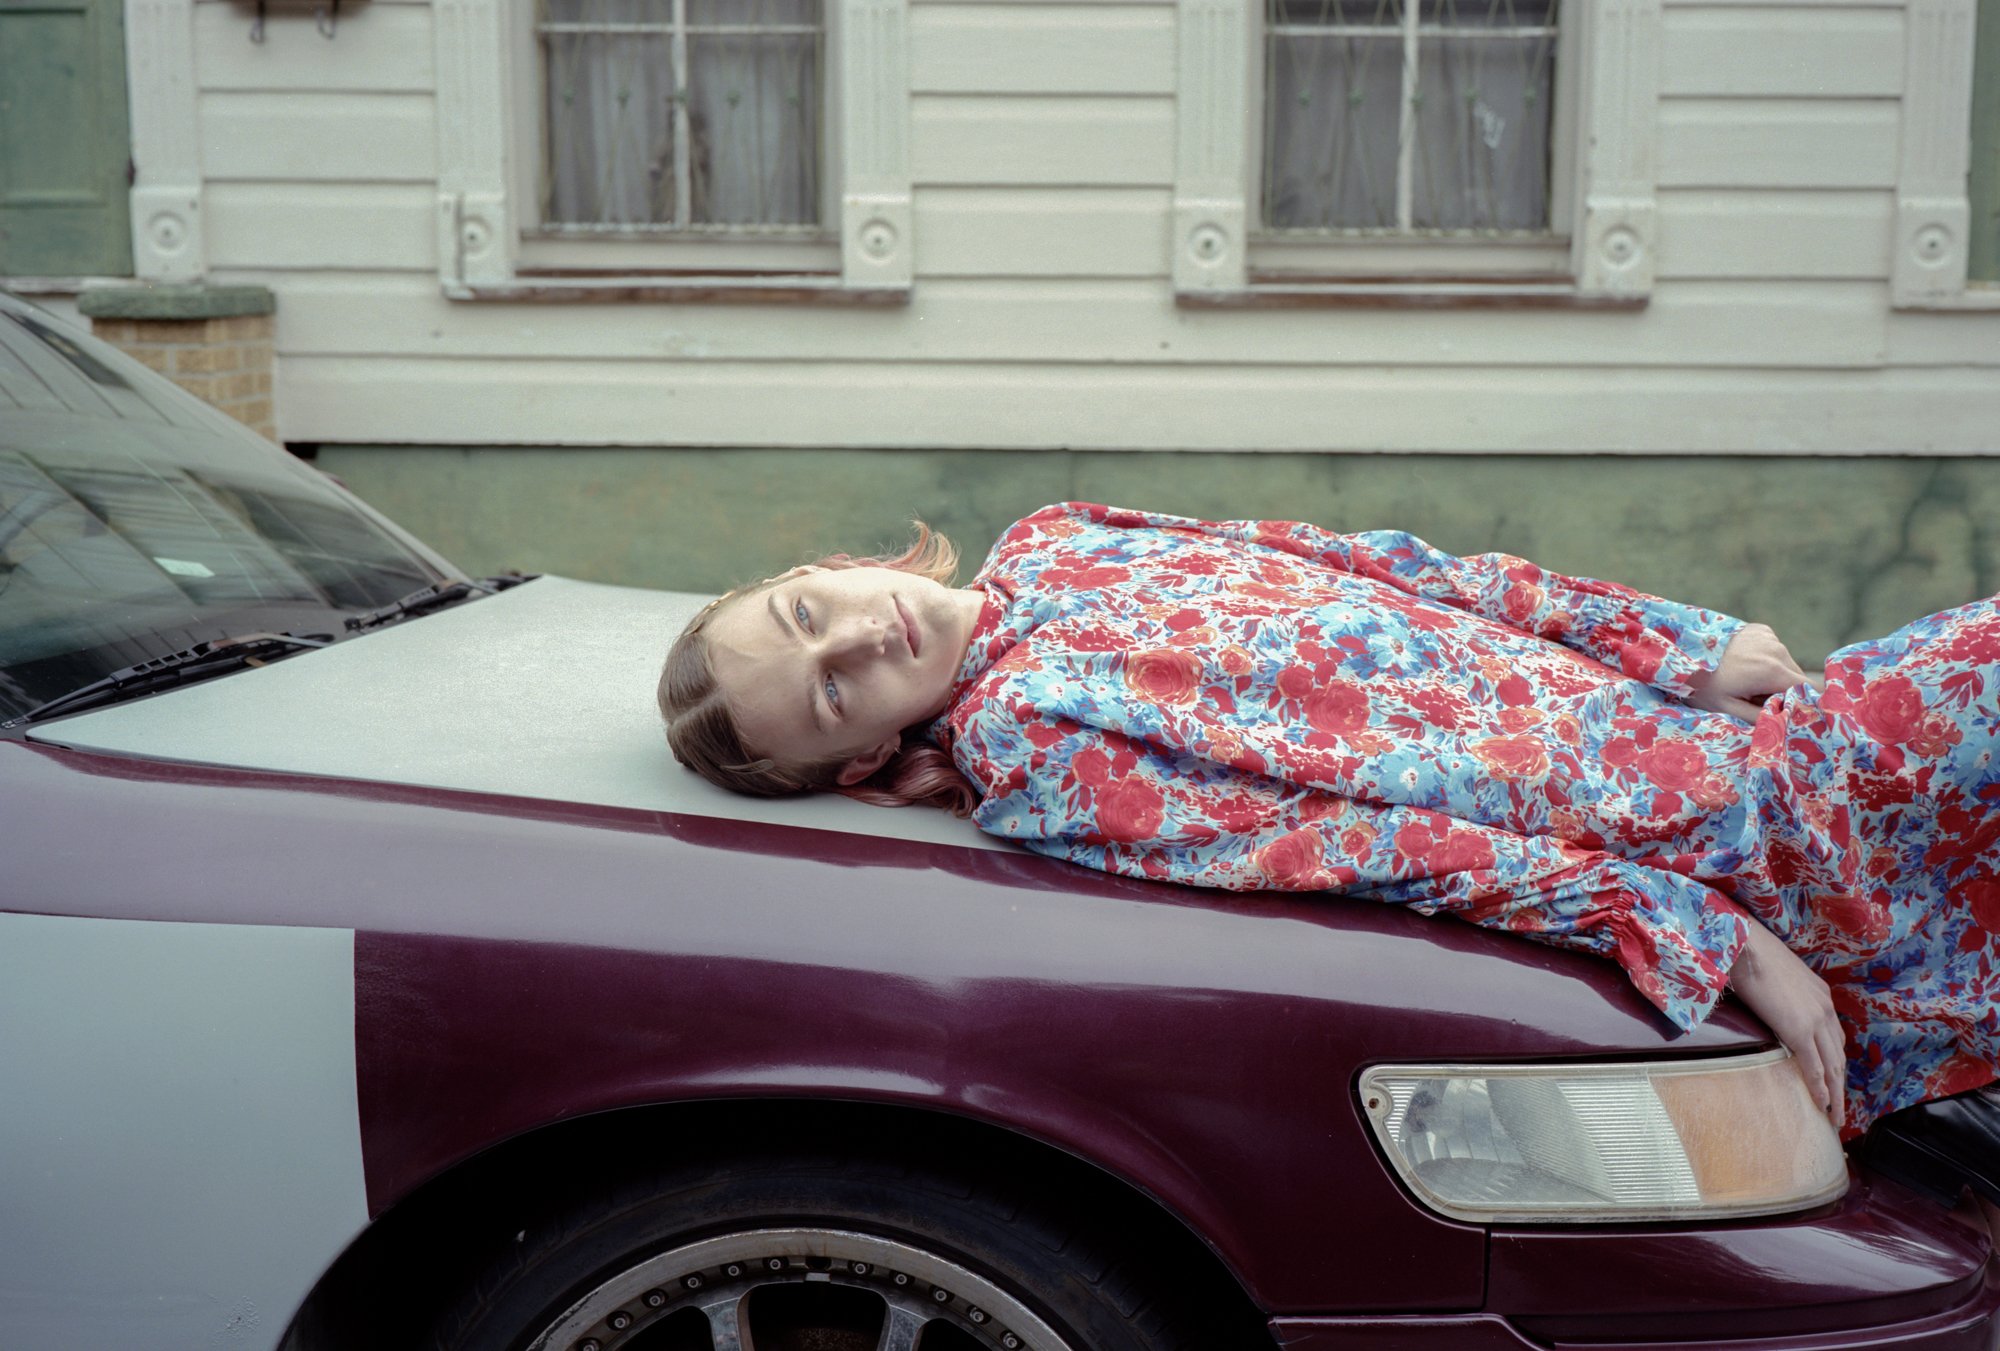 A person with light skin, long combed hair curling at the ends, wearing a blue and red floral print dress with long sleeves covering long arms and torso that is melting over the glossy hood of a burgundy car. Their hand is just resting over the headlight.